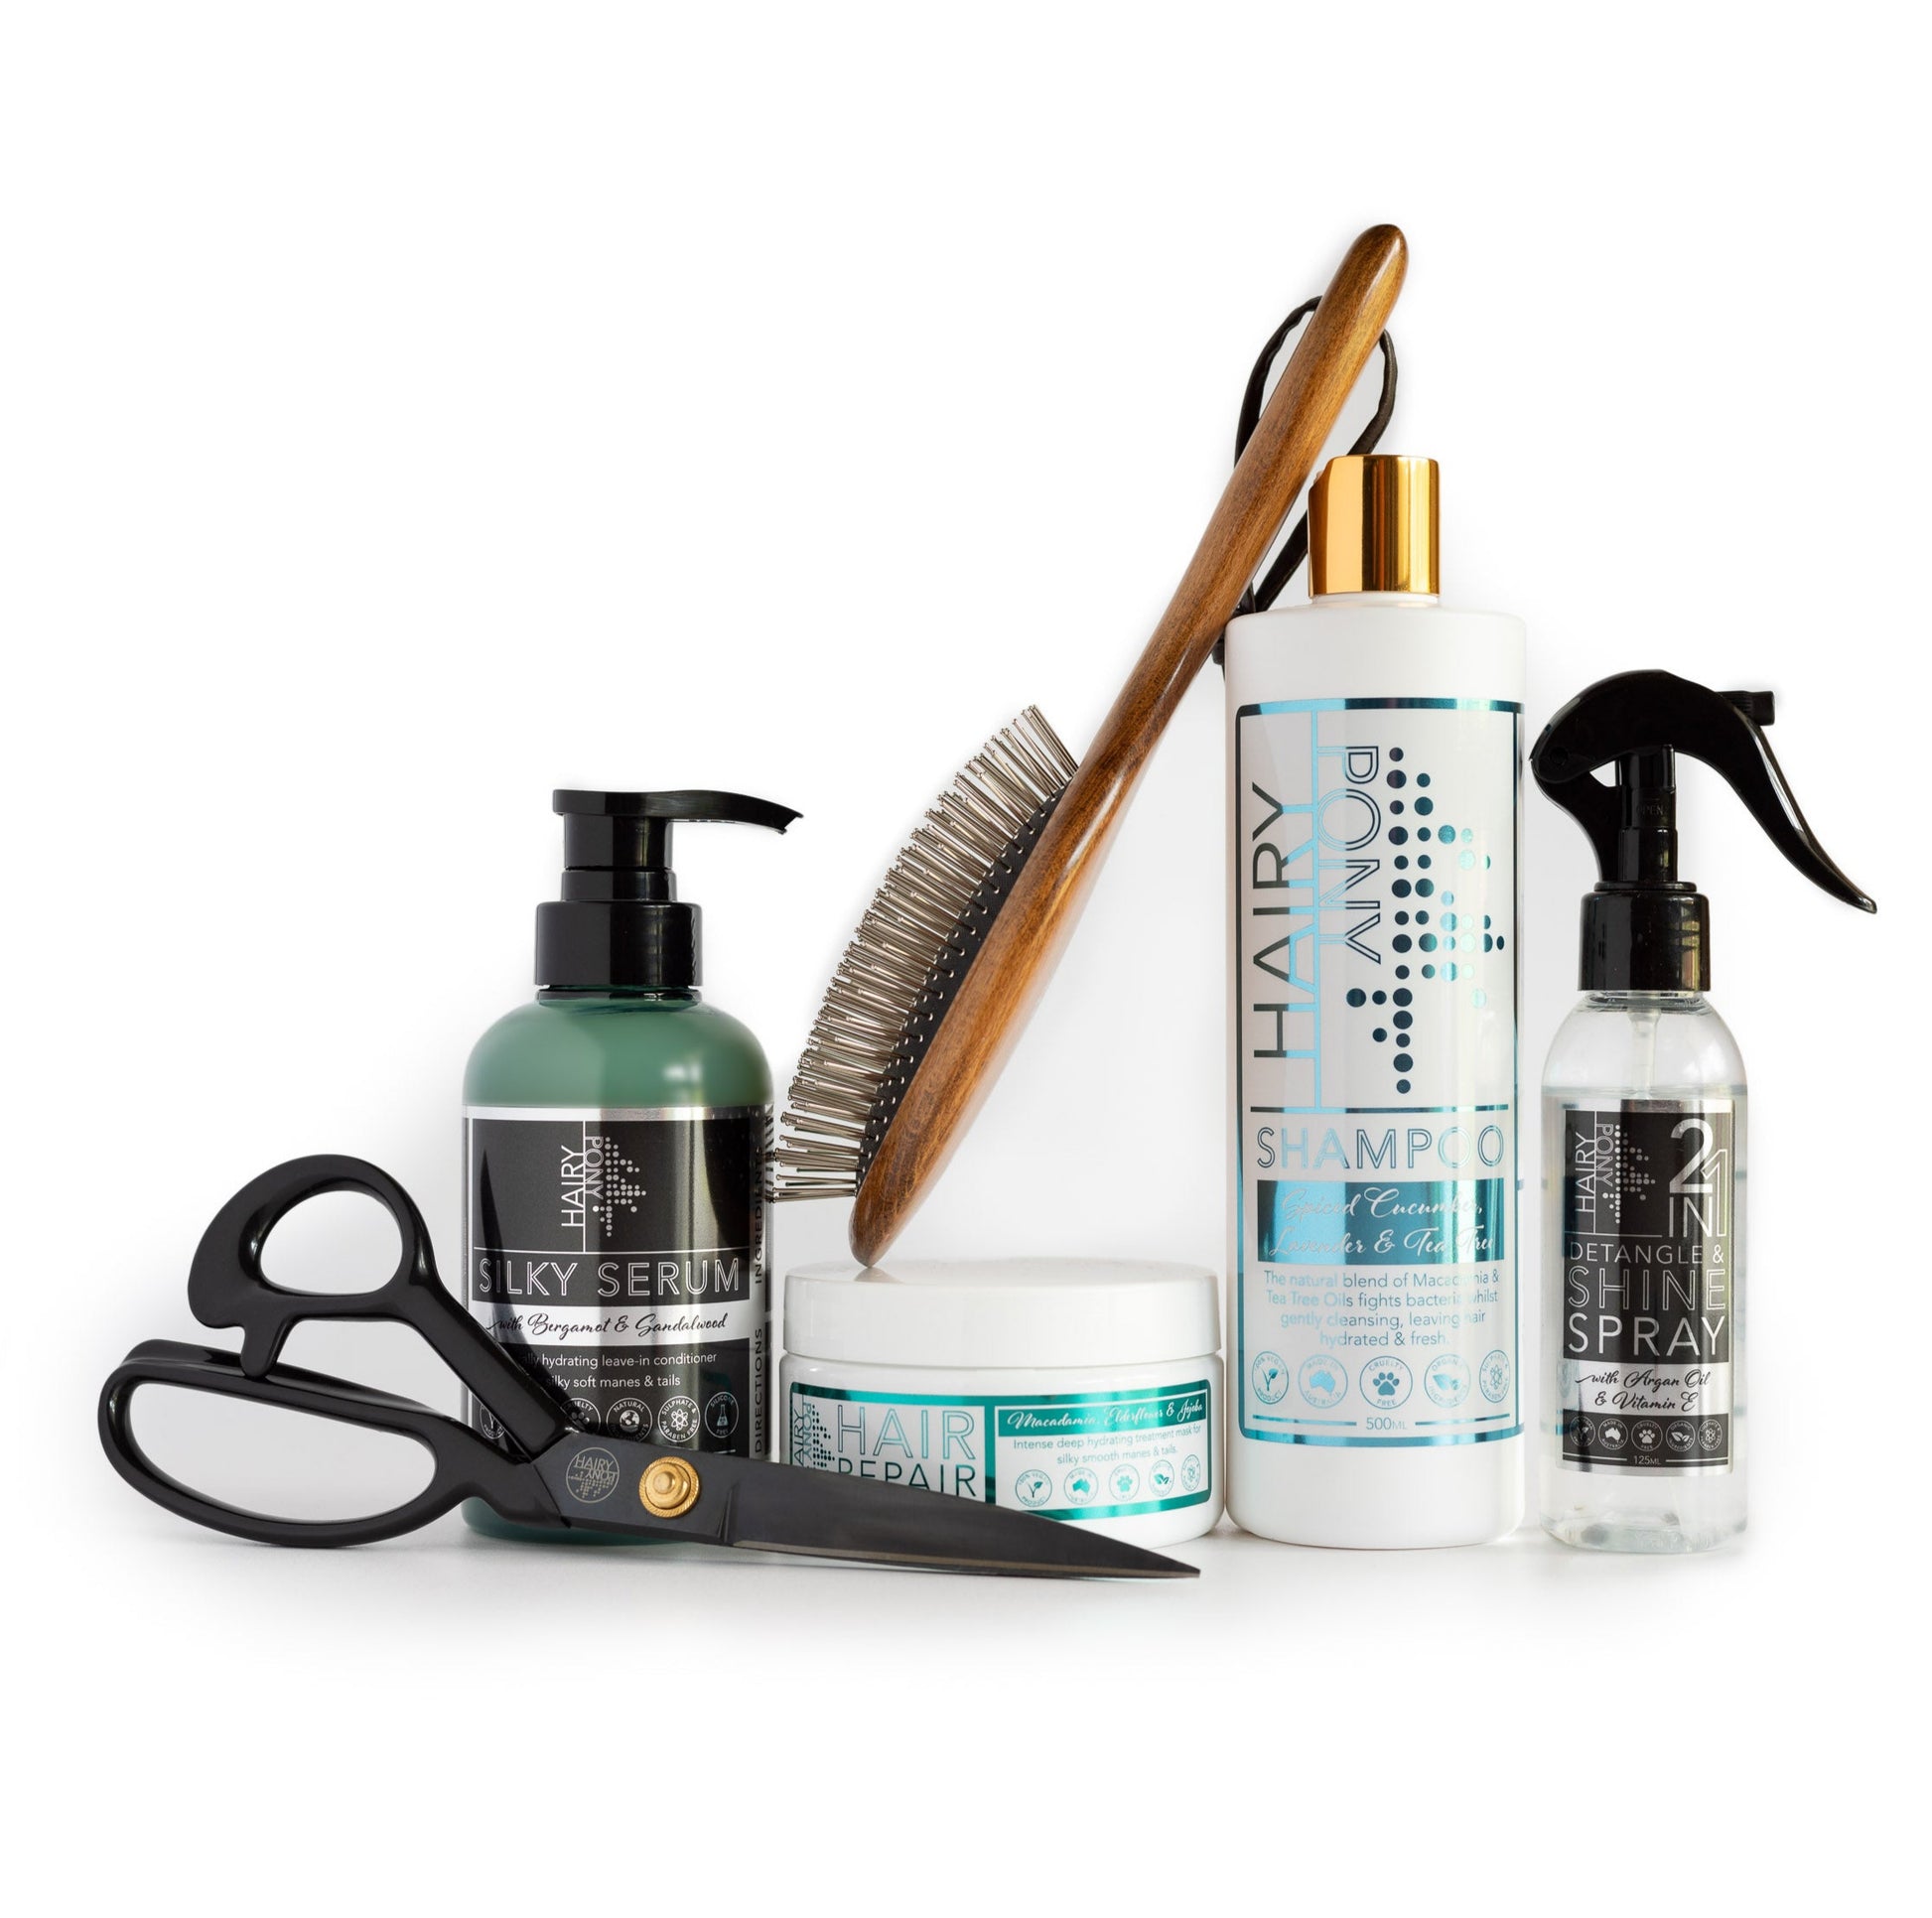 Our 6 piece Horse Tail Grooming Kit